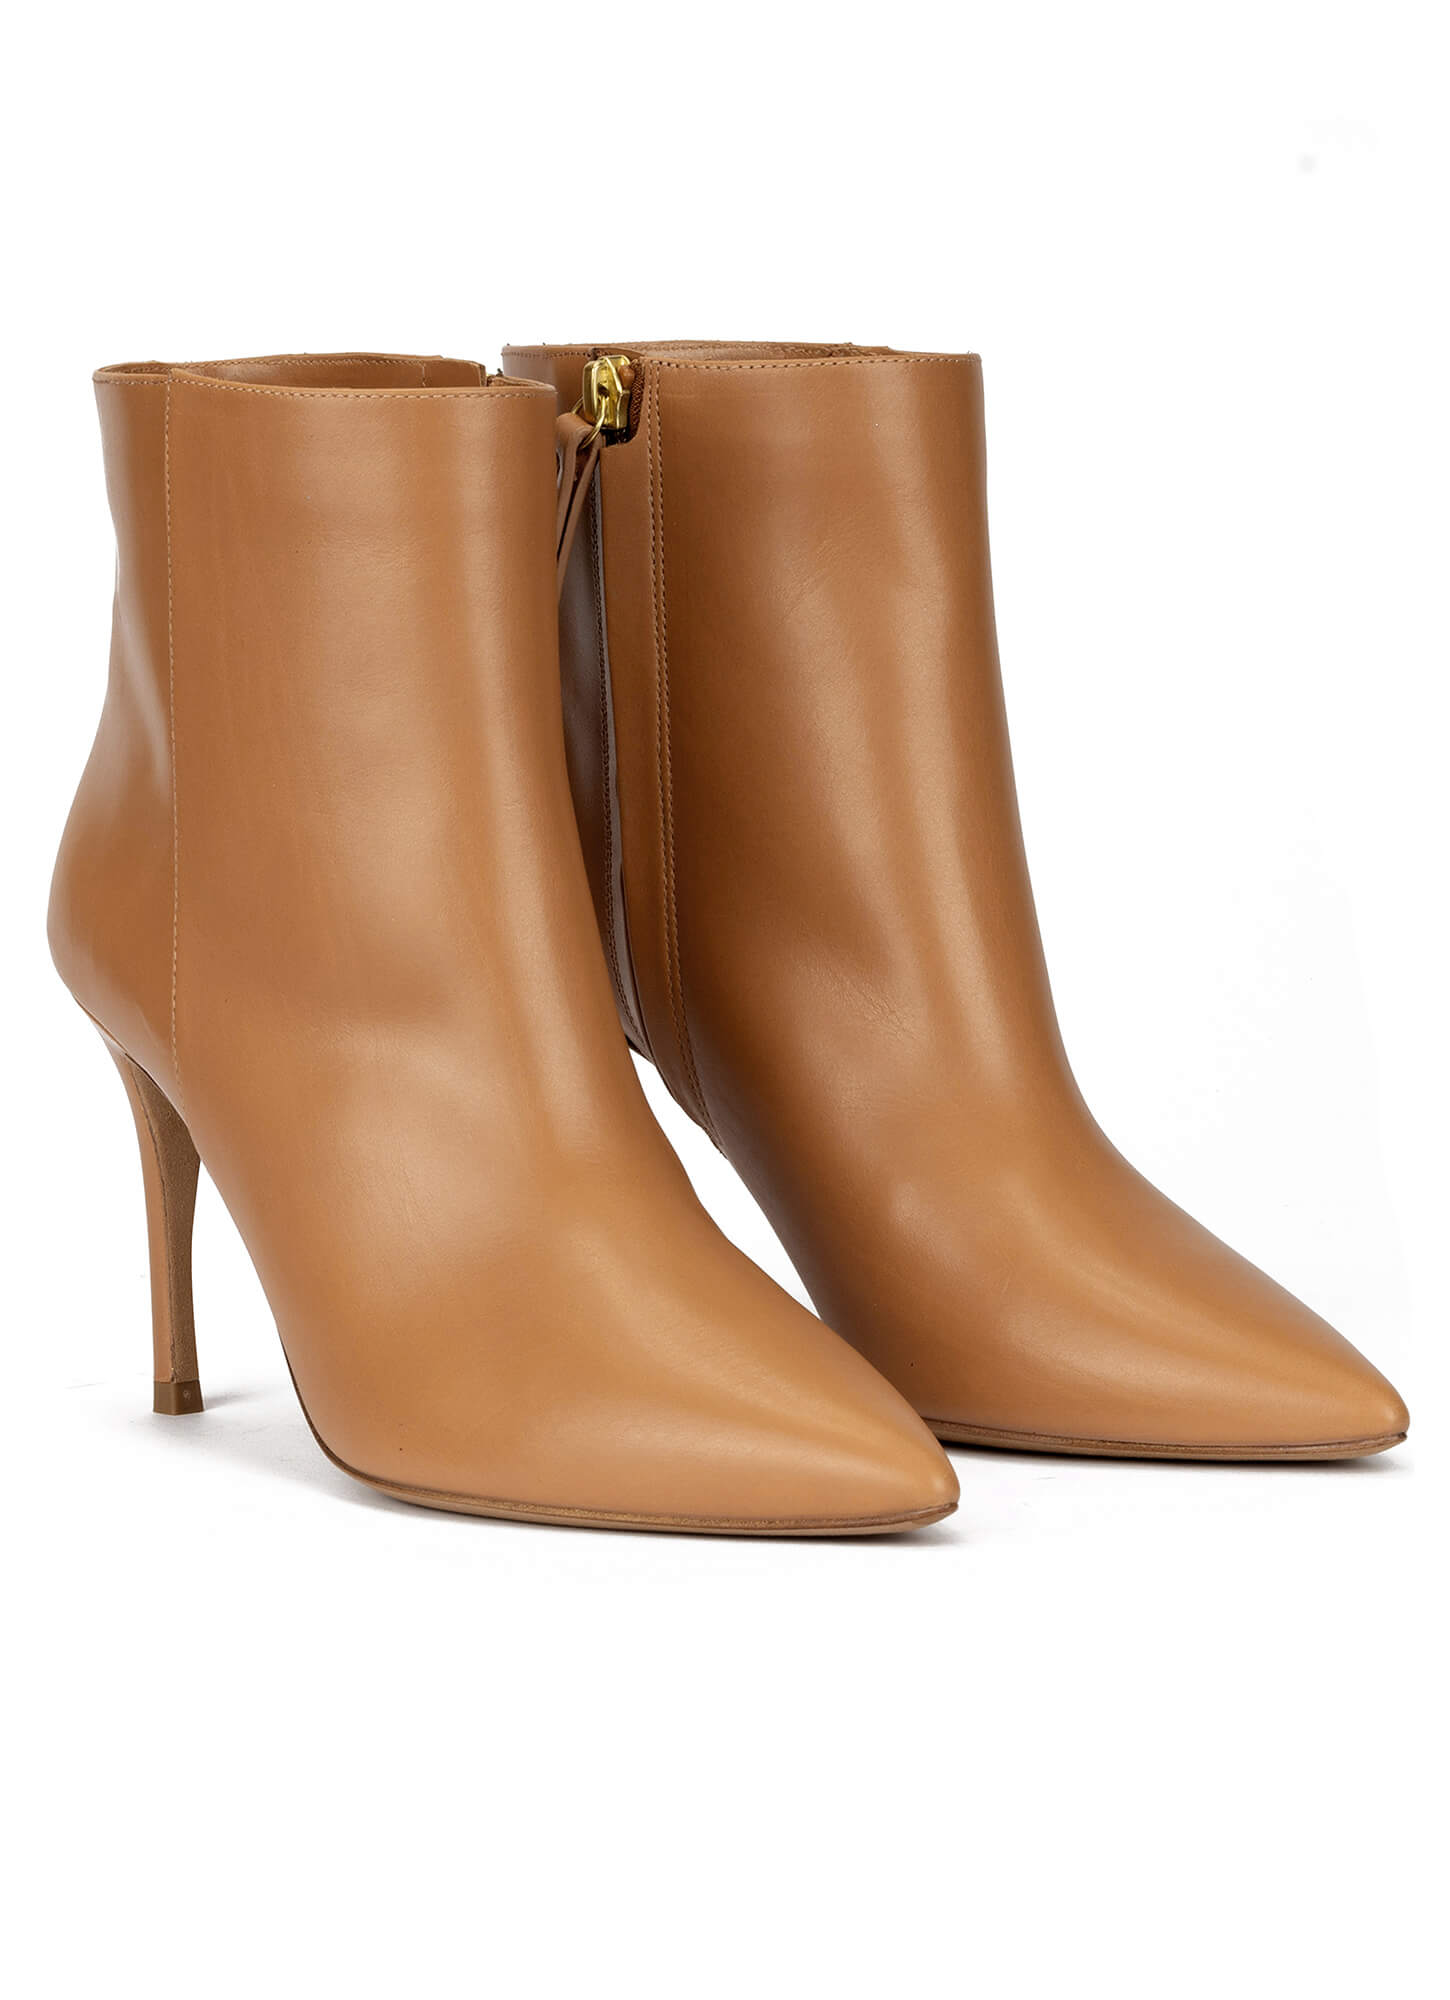 Heeled pointy toe ankle boots in camel leather . PURA LOPEZ